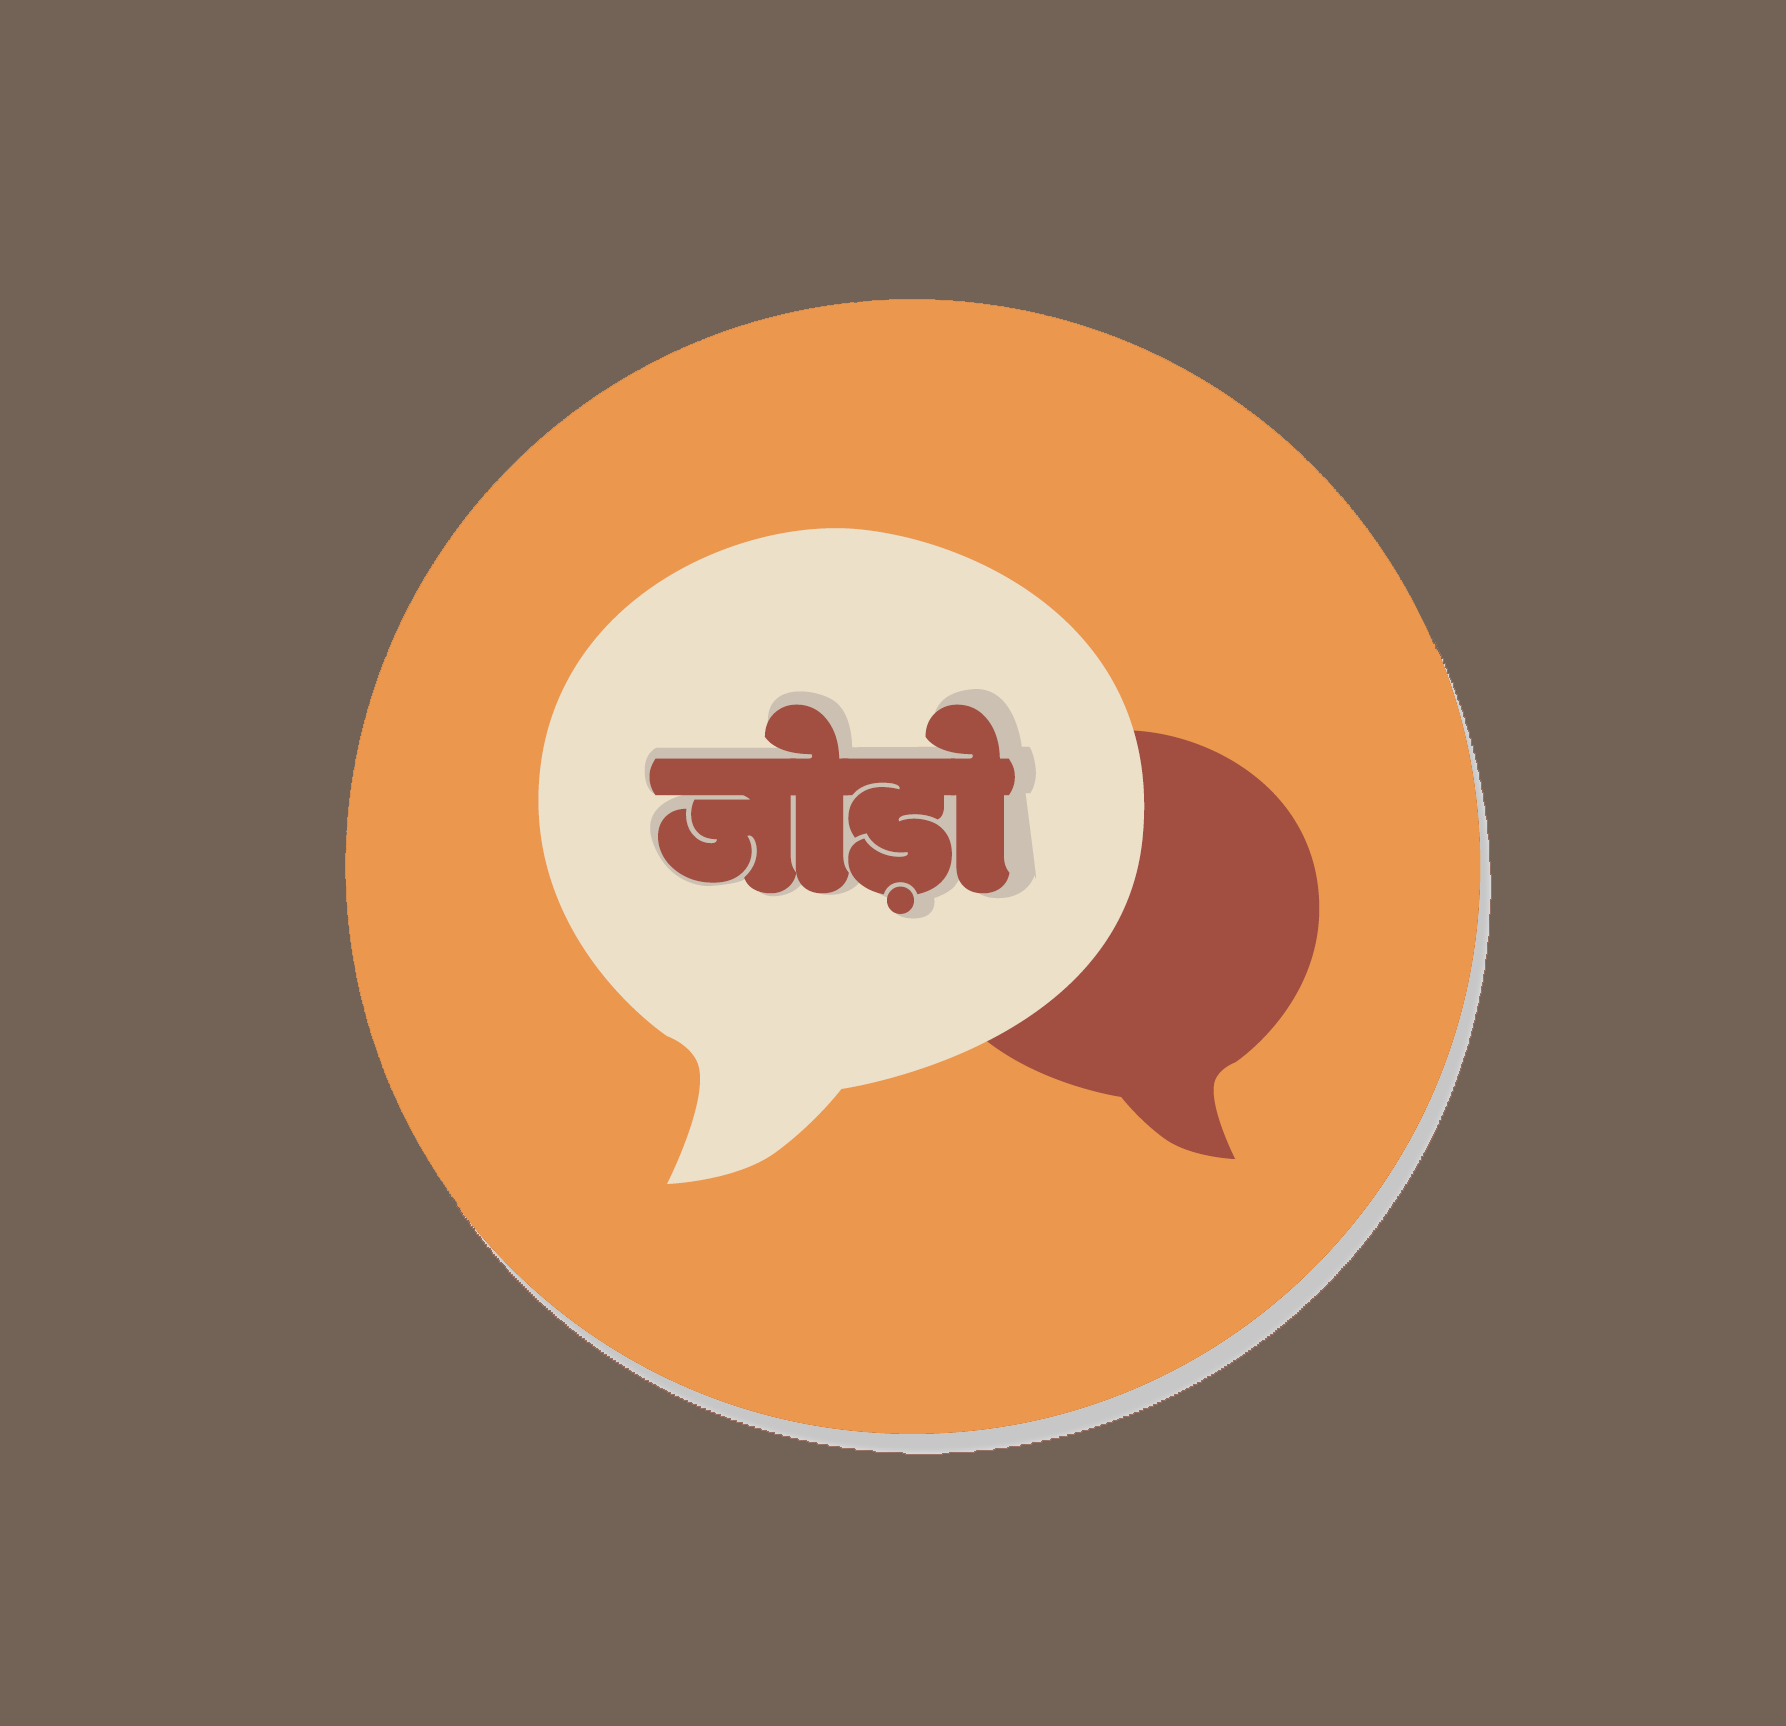 Jodo- Tool for Foreigners to learn the Hindi Language